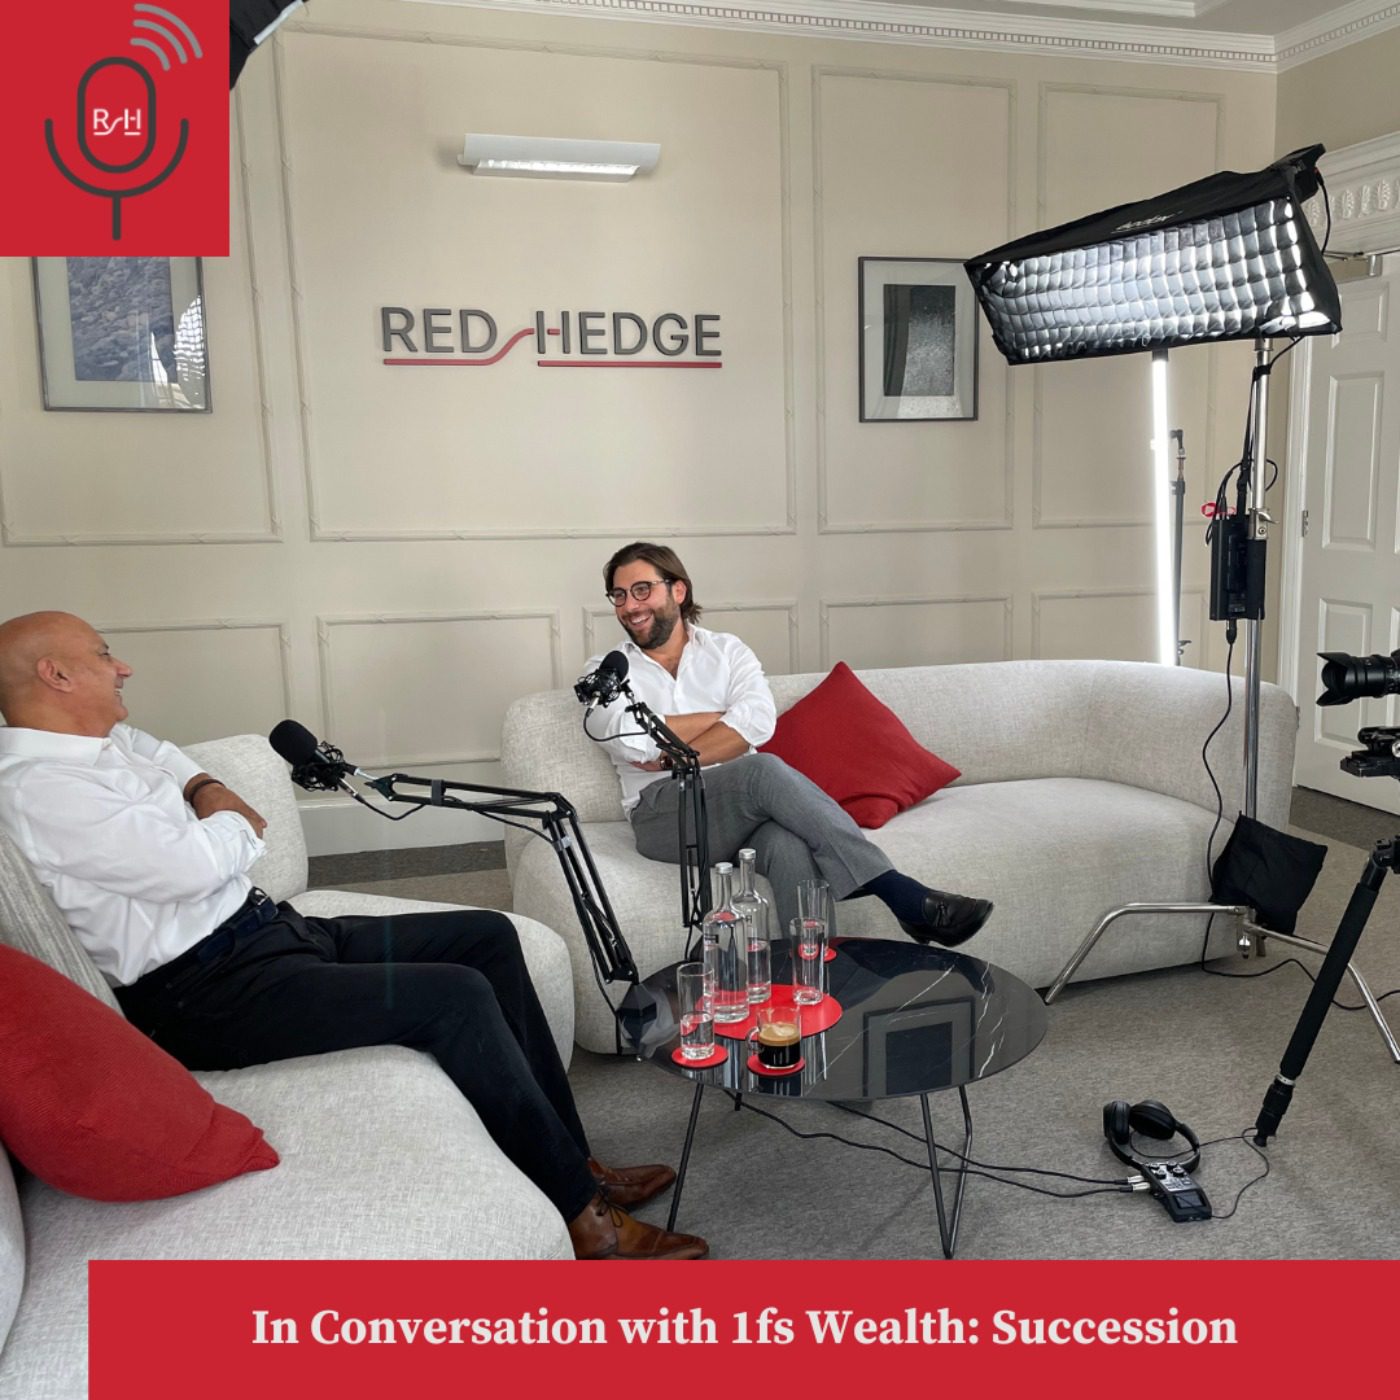 In Conversation with 1fs Wealth: Succession